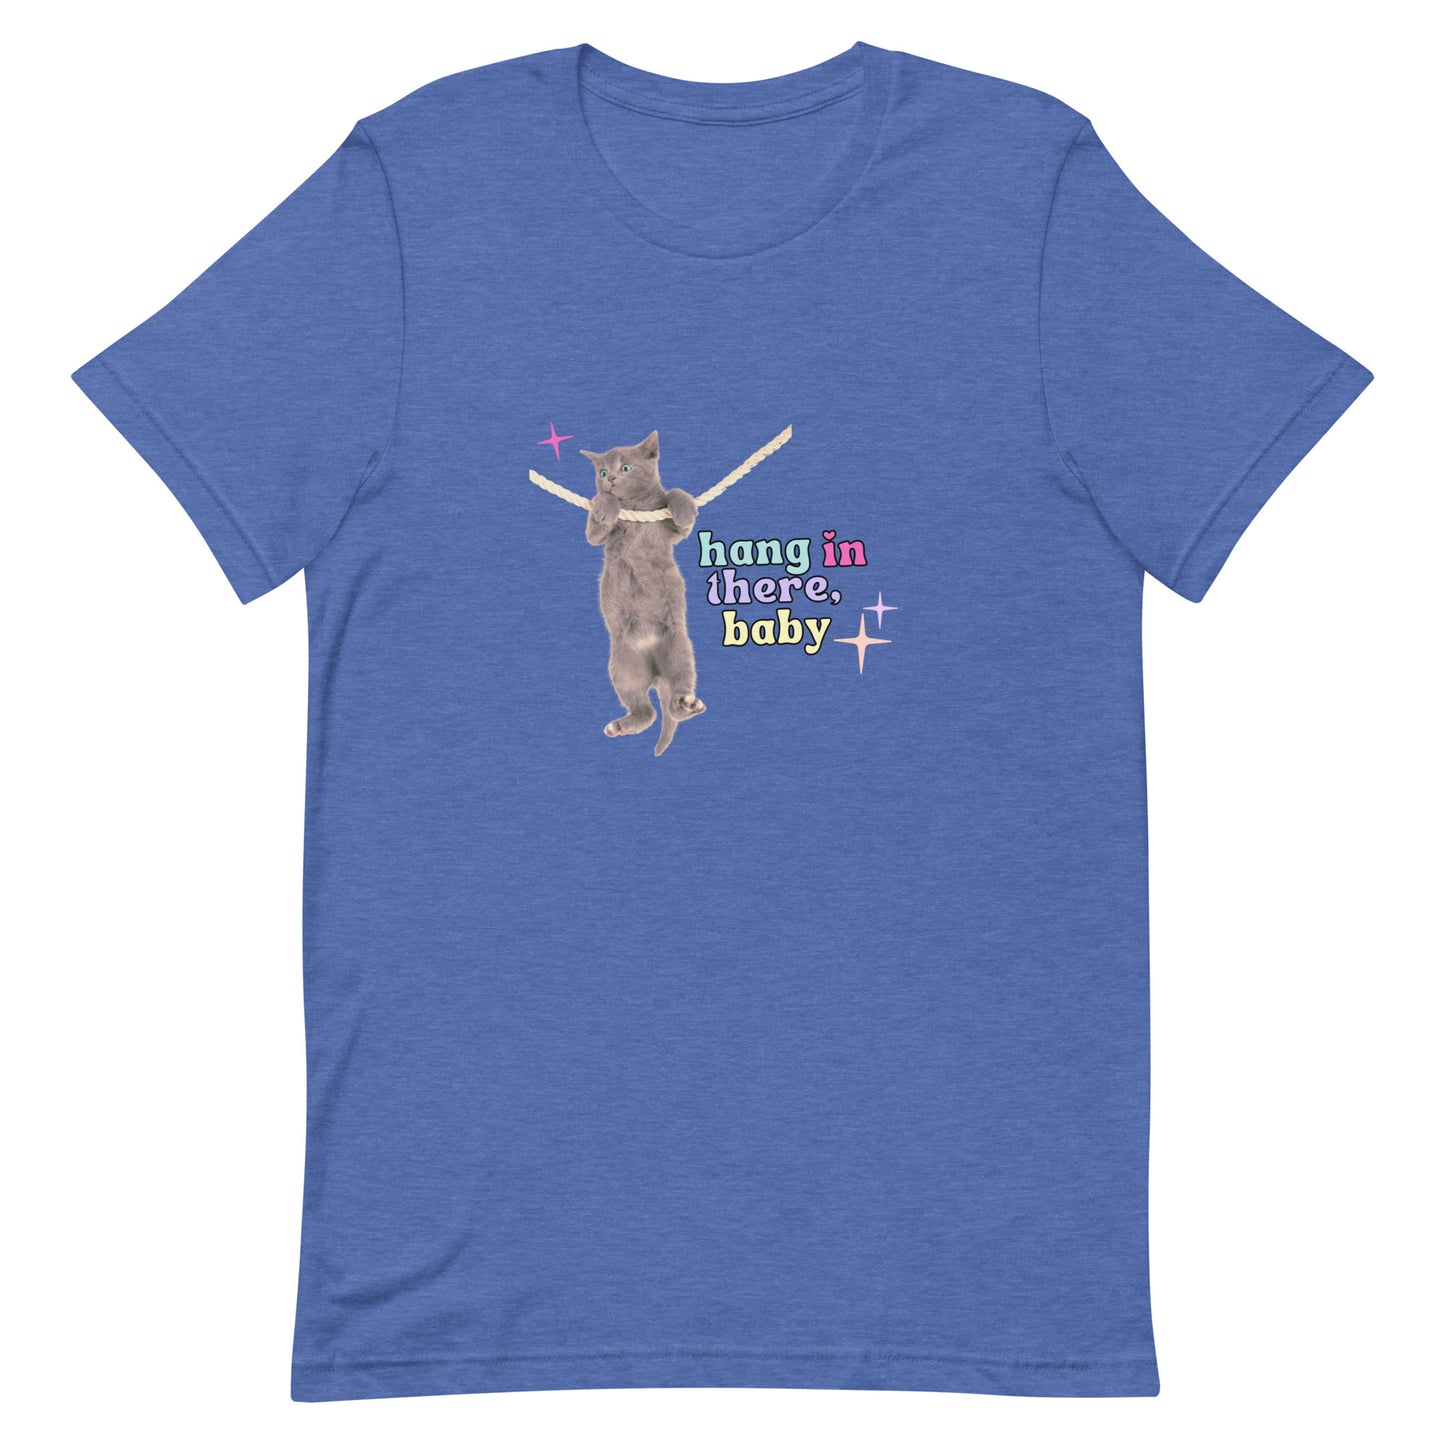 Hang In There Baby t-shirt